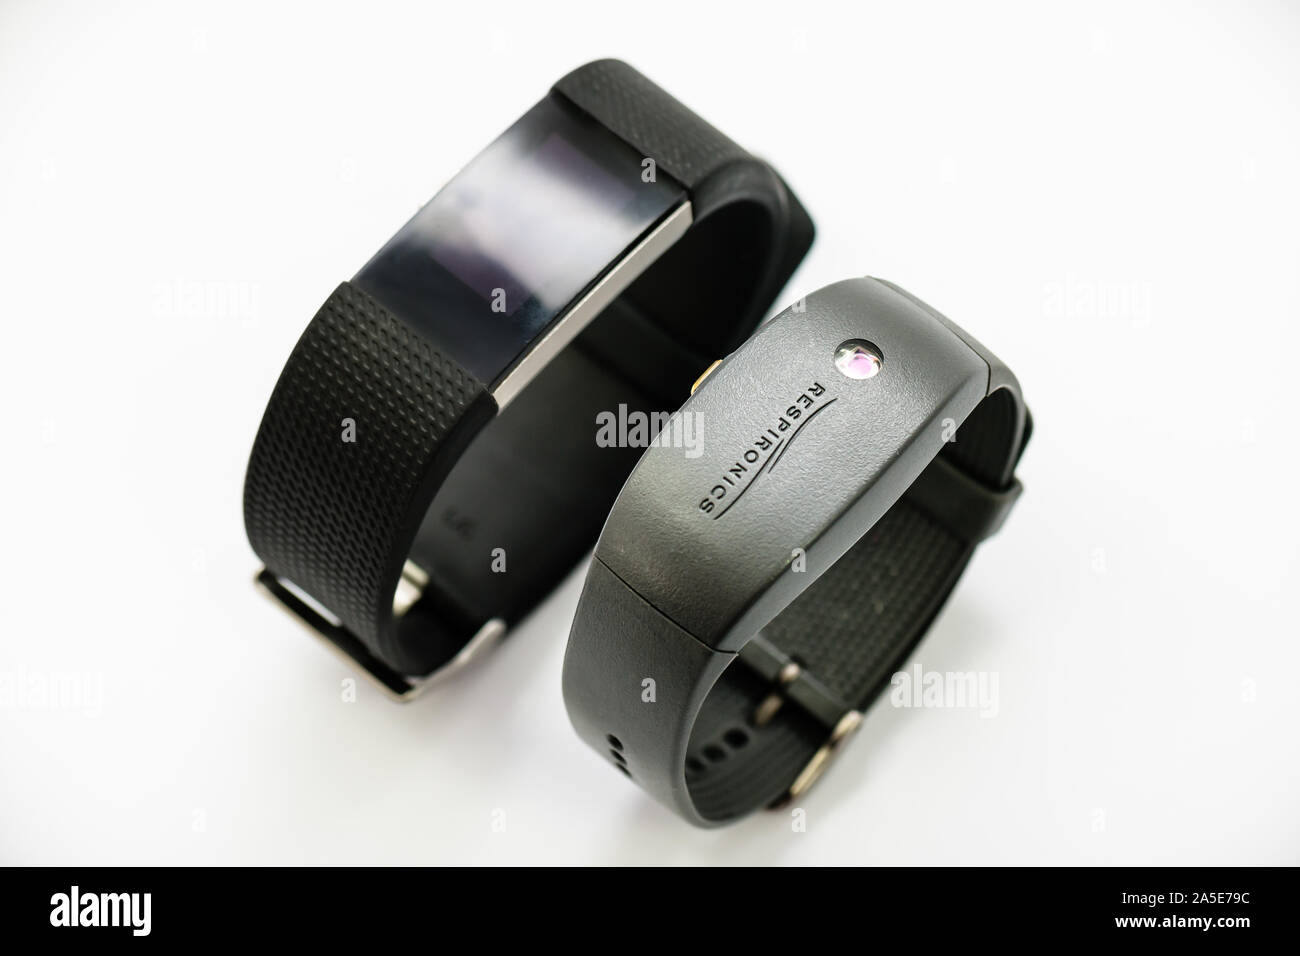 A Philips Respironics Actiwatch and a Fitbit Charge 2. Clinical vs commercial activity tracker watch for insomnia, sleep studies and monitoring. Stock Photo